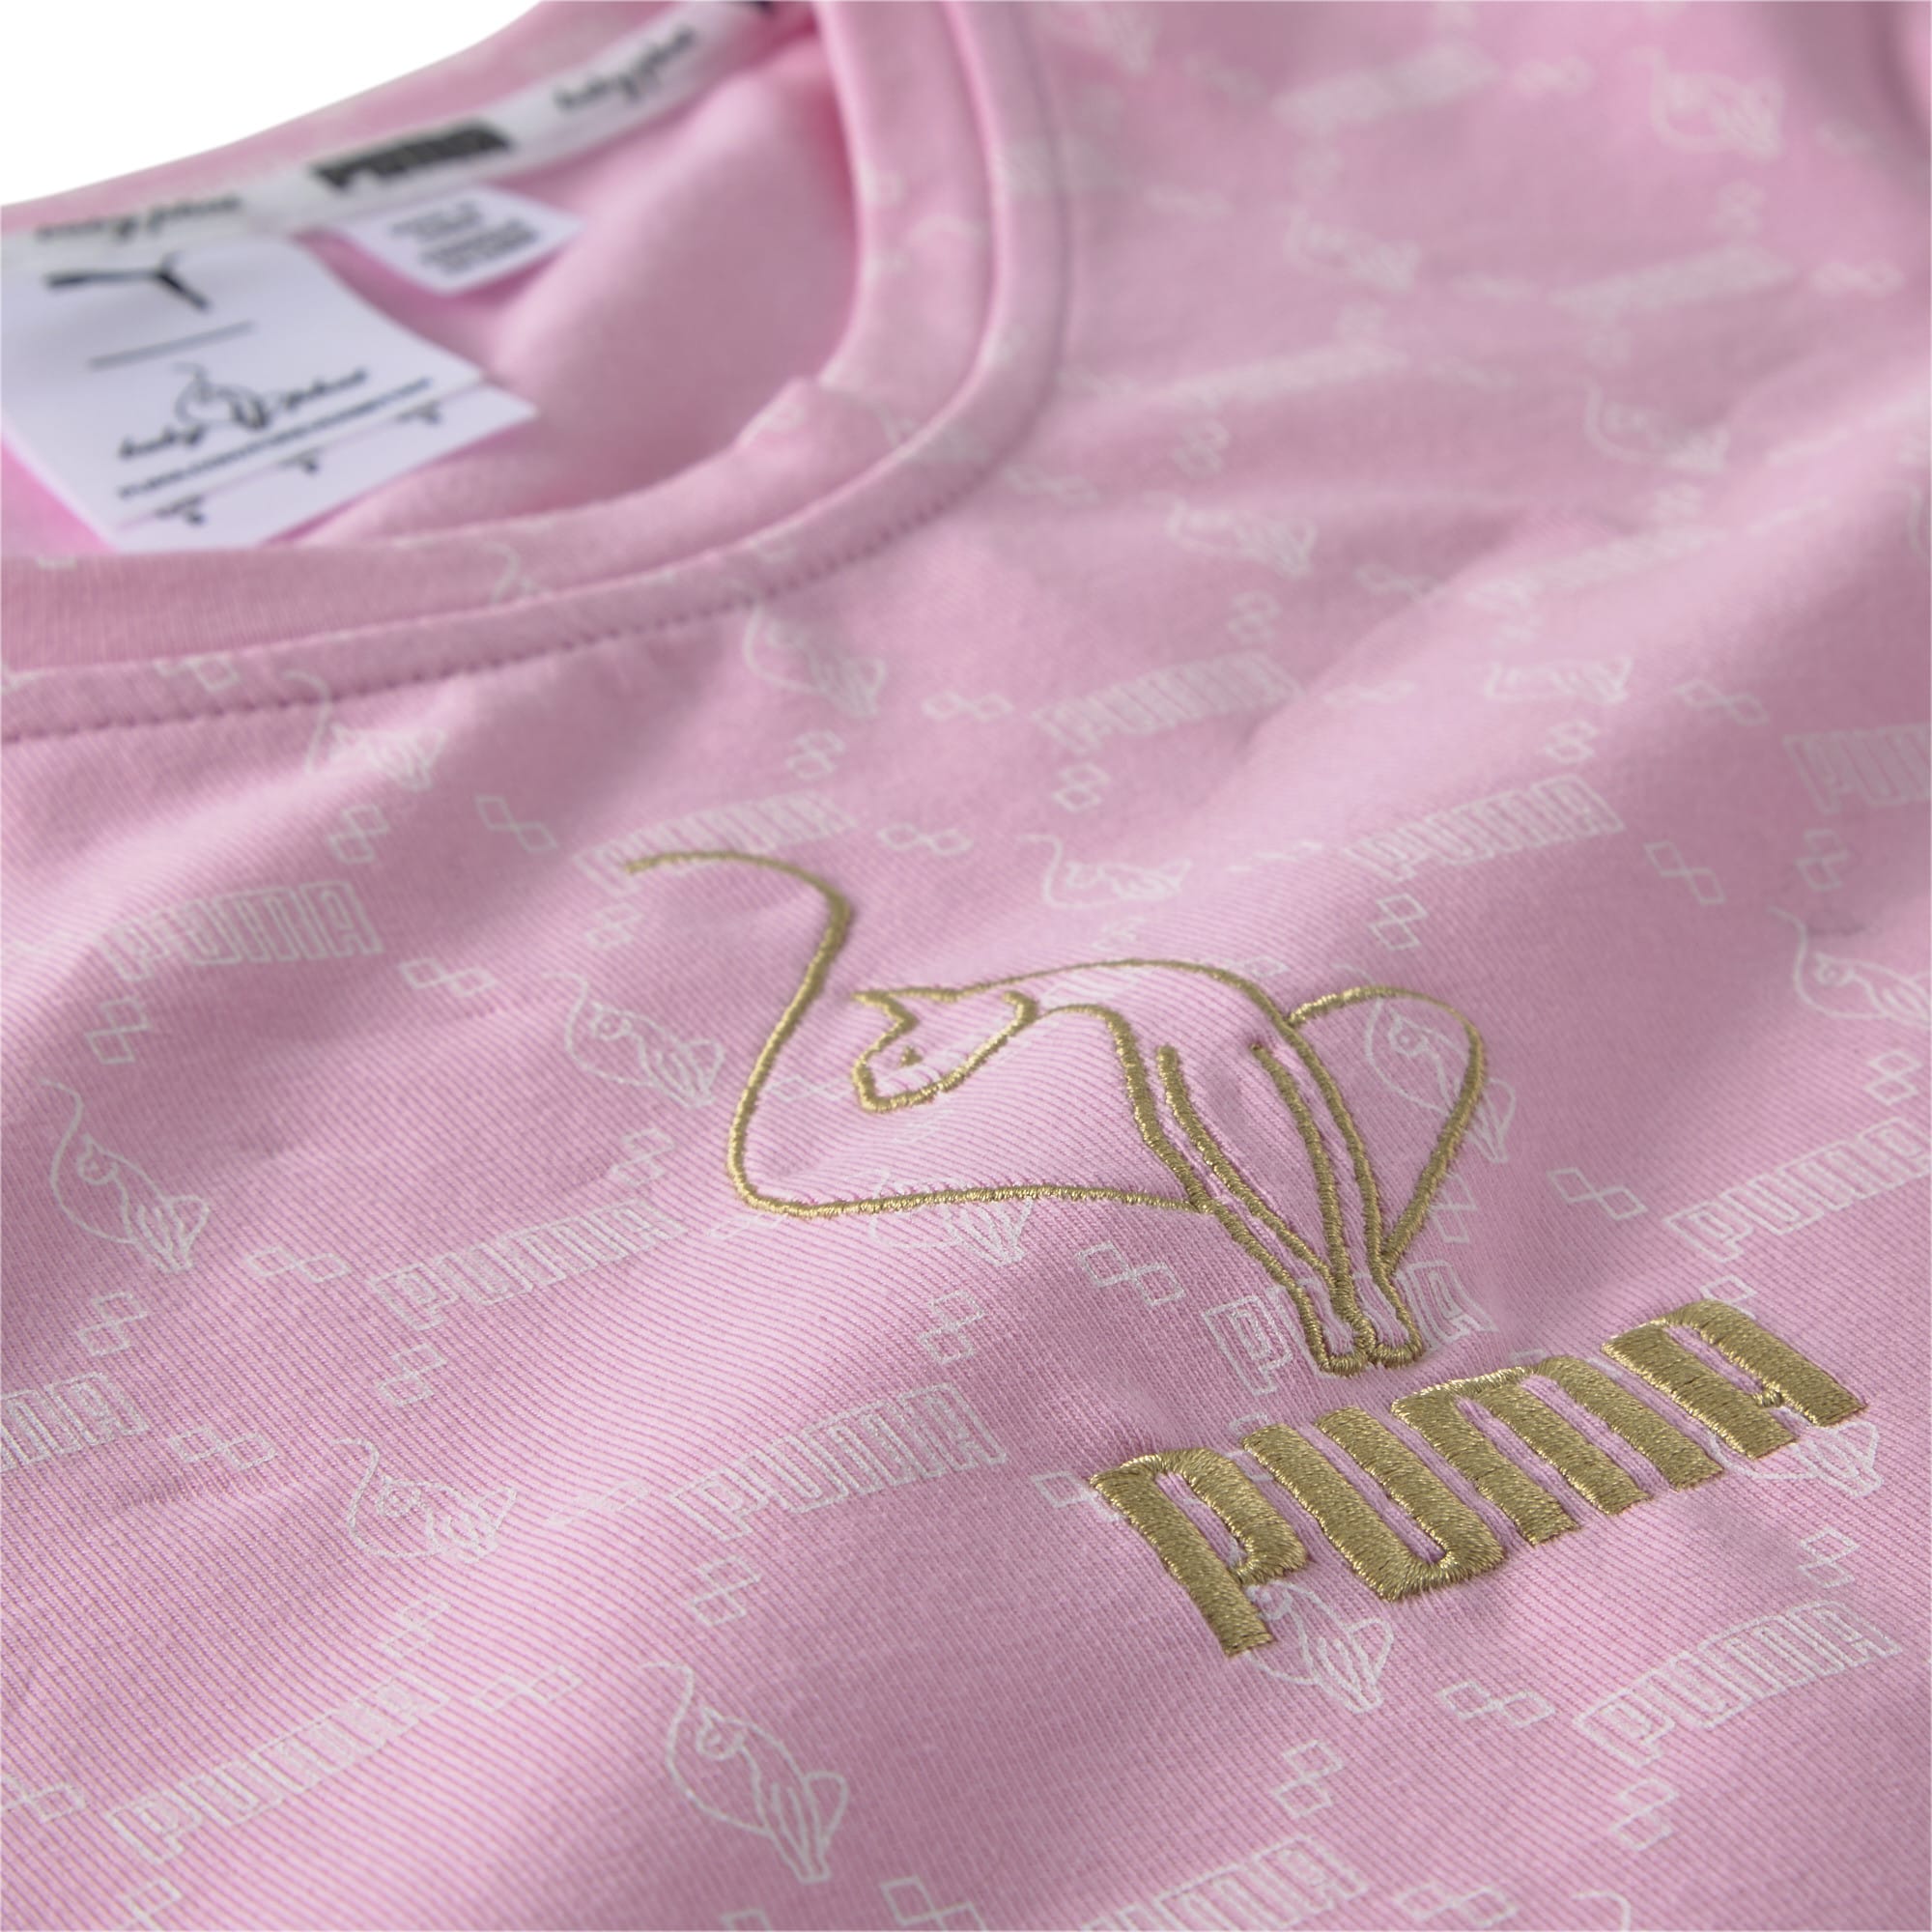 Puma and Kimora Lee Simmons' Baby Phat Collaborate on New Collection